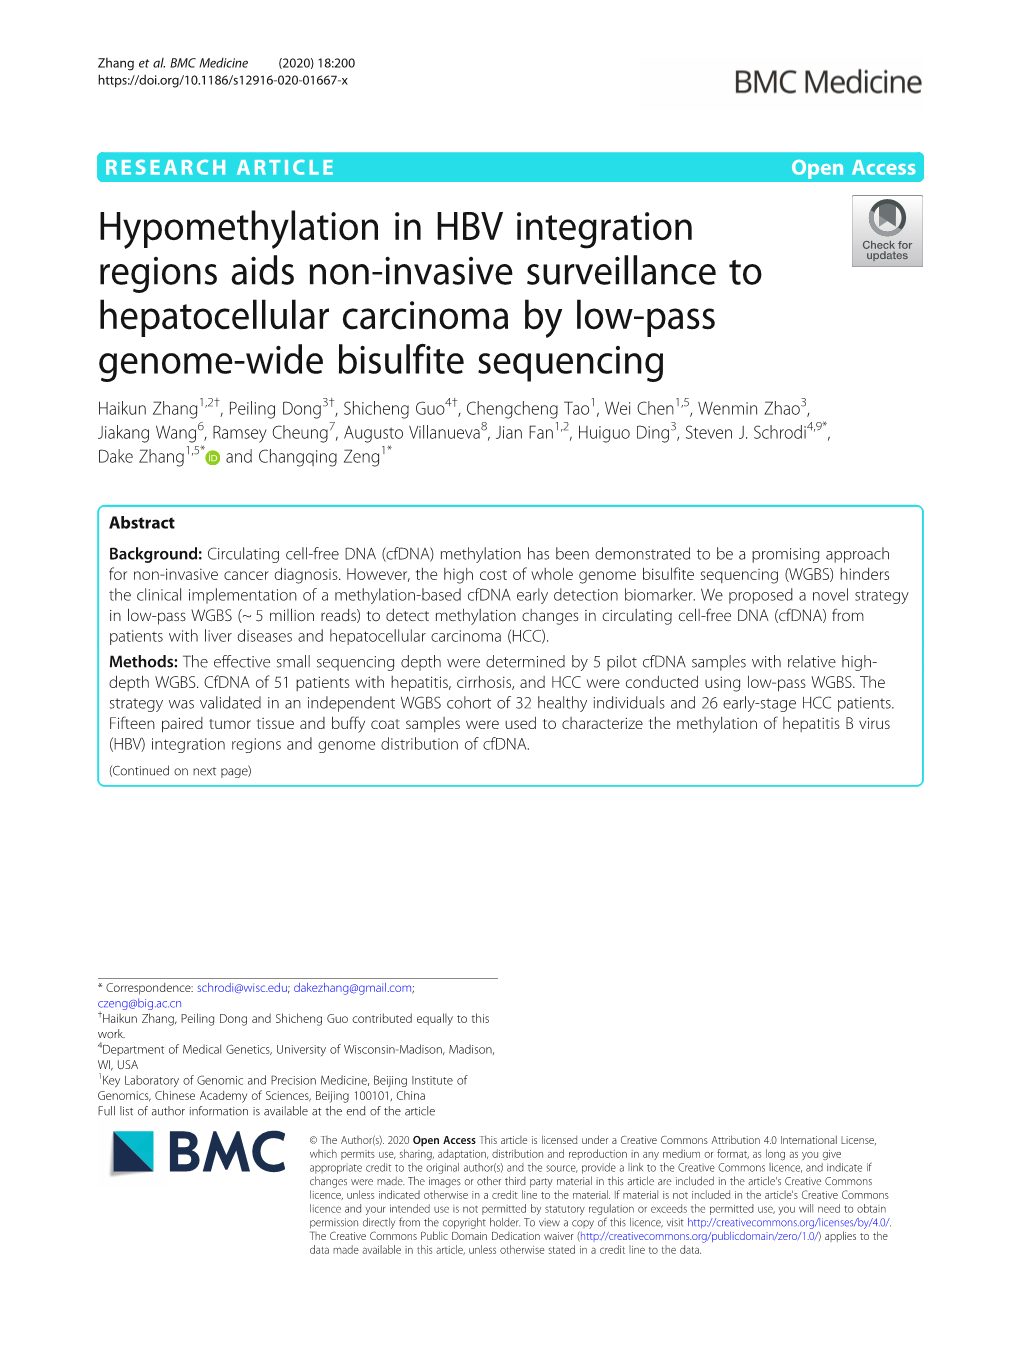 Hypomethylation in HBV Integration Regions Aids Non-Invasive Surveillance to Hepatocellular Carcinoma by Low-Pass Genome-Wide Bi